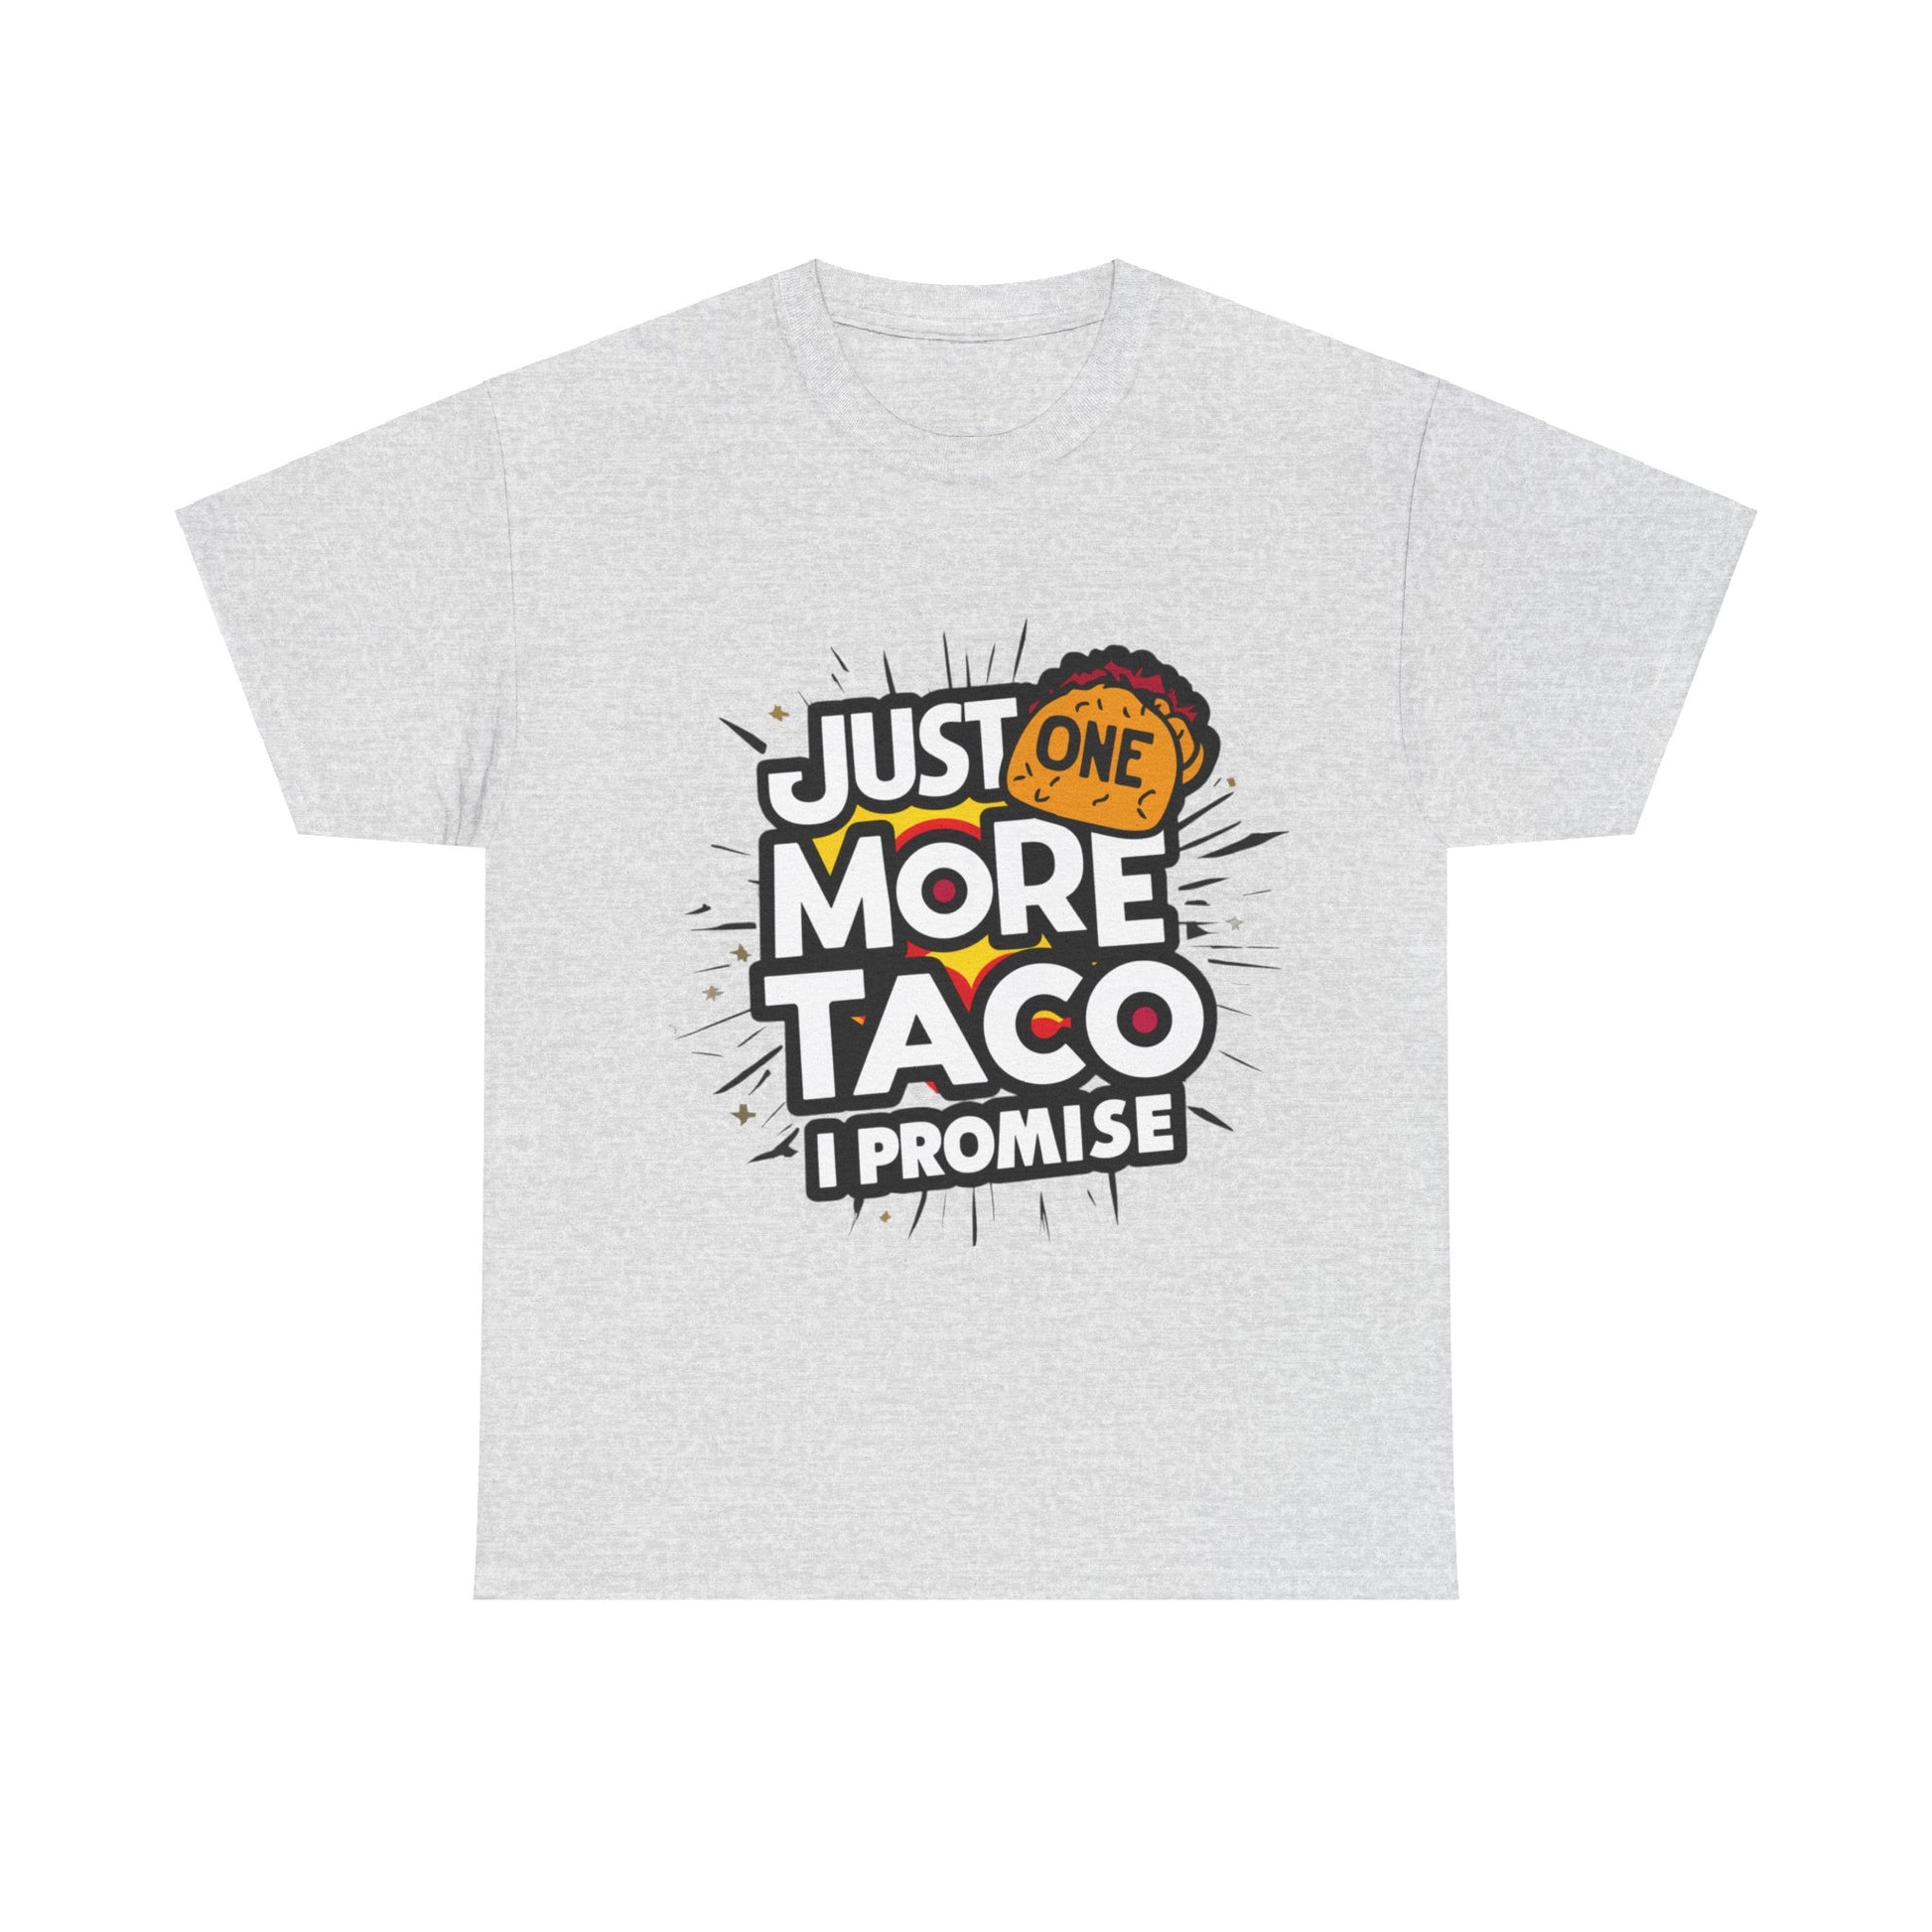 Copy of Just One More Taco I Promise Mexican Food Graphic Unisex Heavy Cotton Tee Cotton Funny Humorous Graphic Soft Premium Unisex Men Women Ash T-shirt Birthday Gift-13